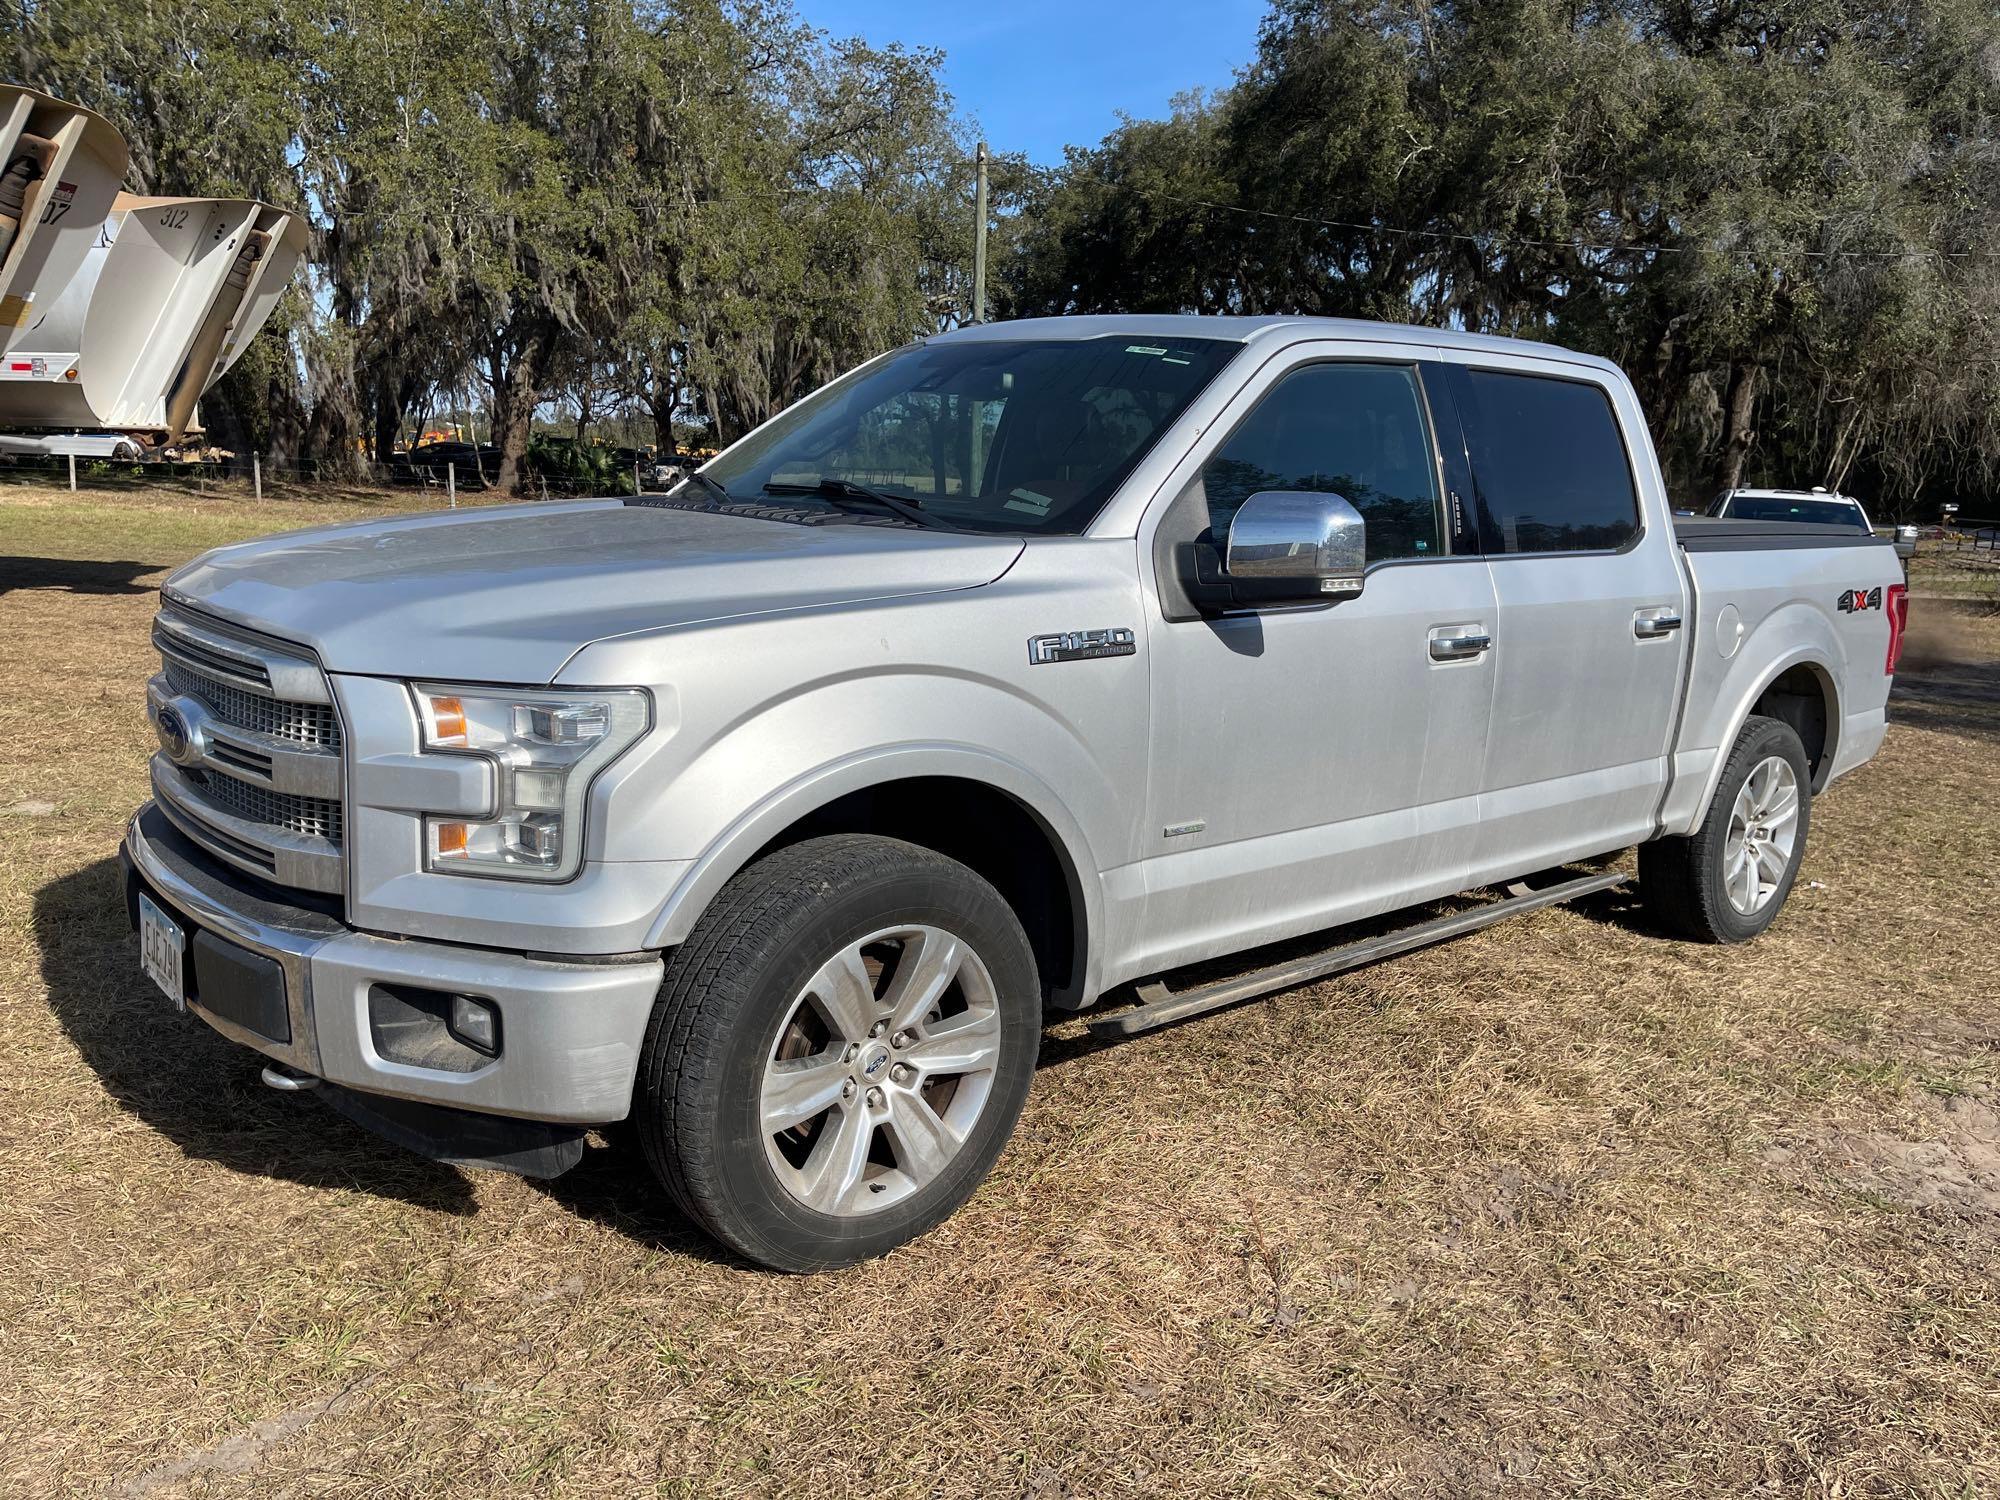 2016 FORD F150 PLATINUM VN:B36933 4x4 Powered By Gas